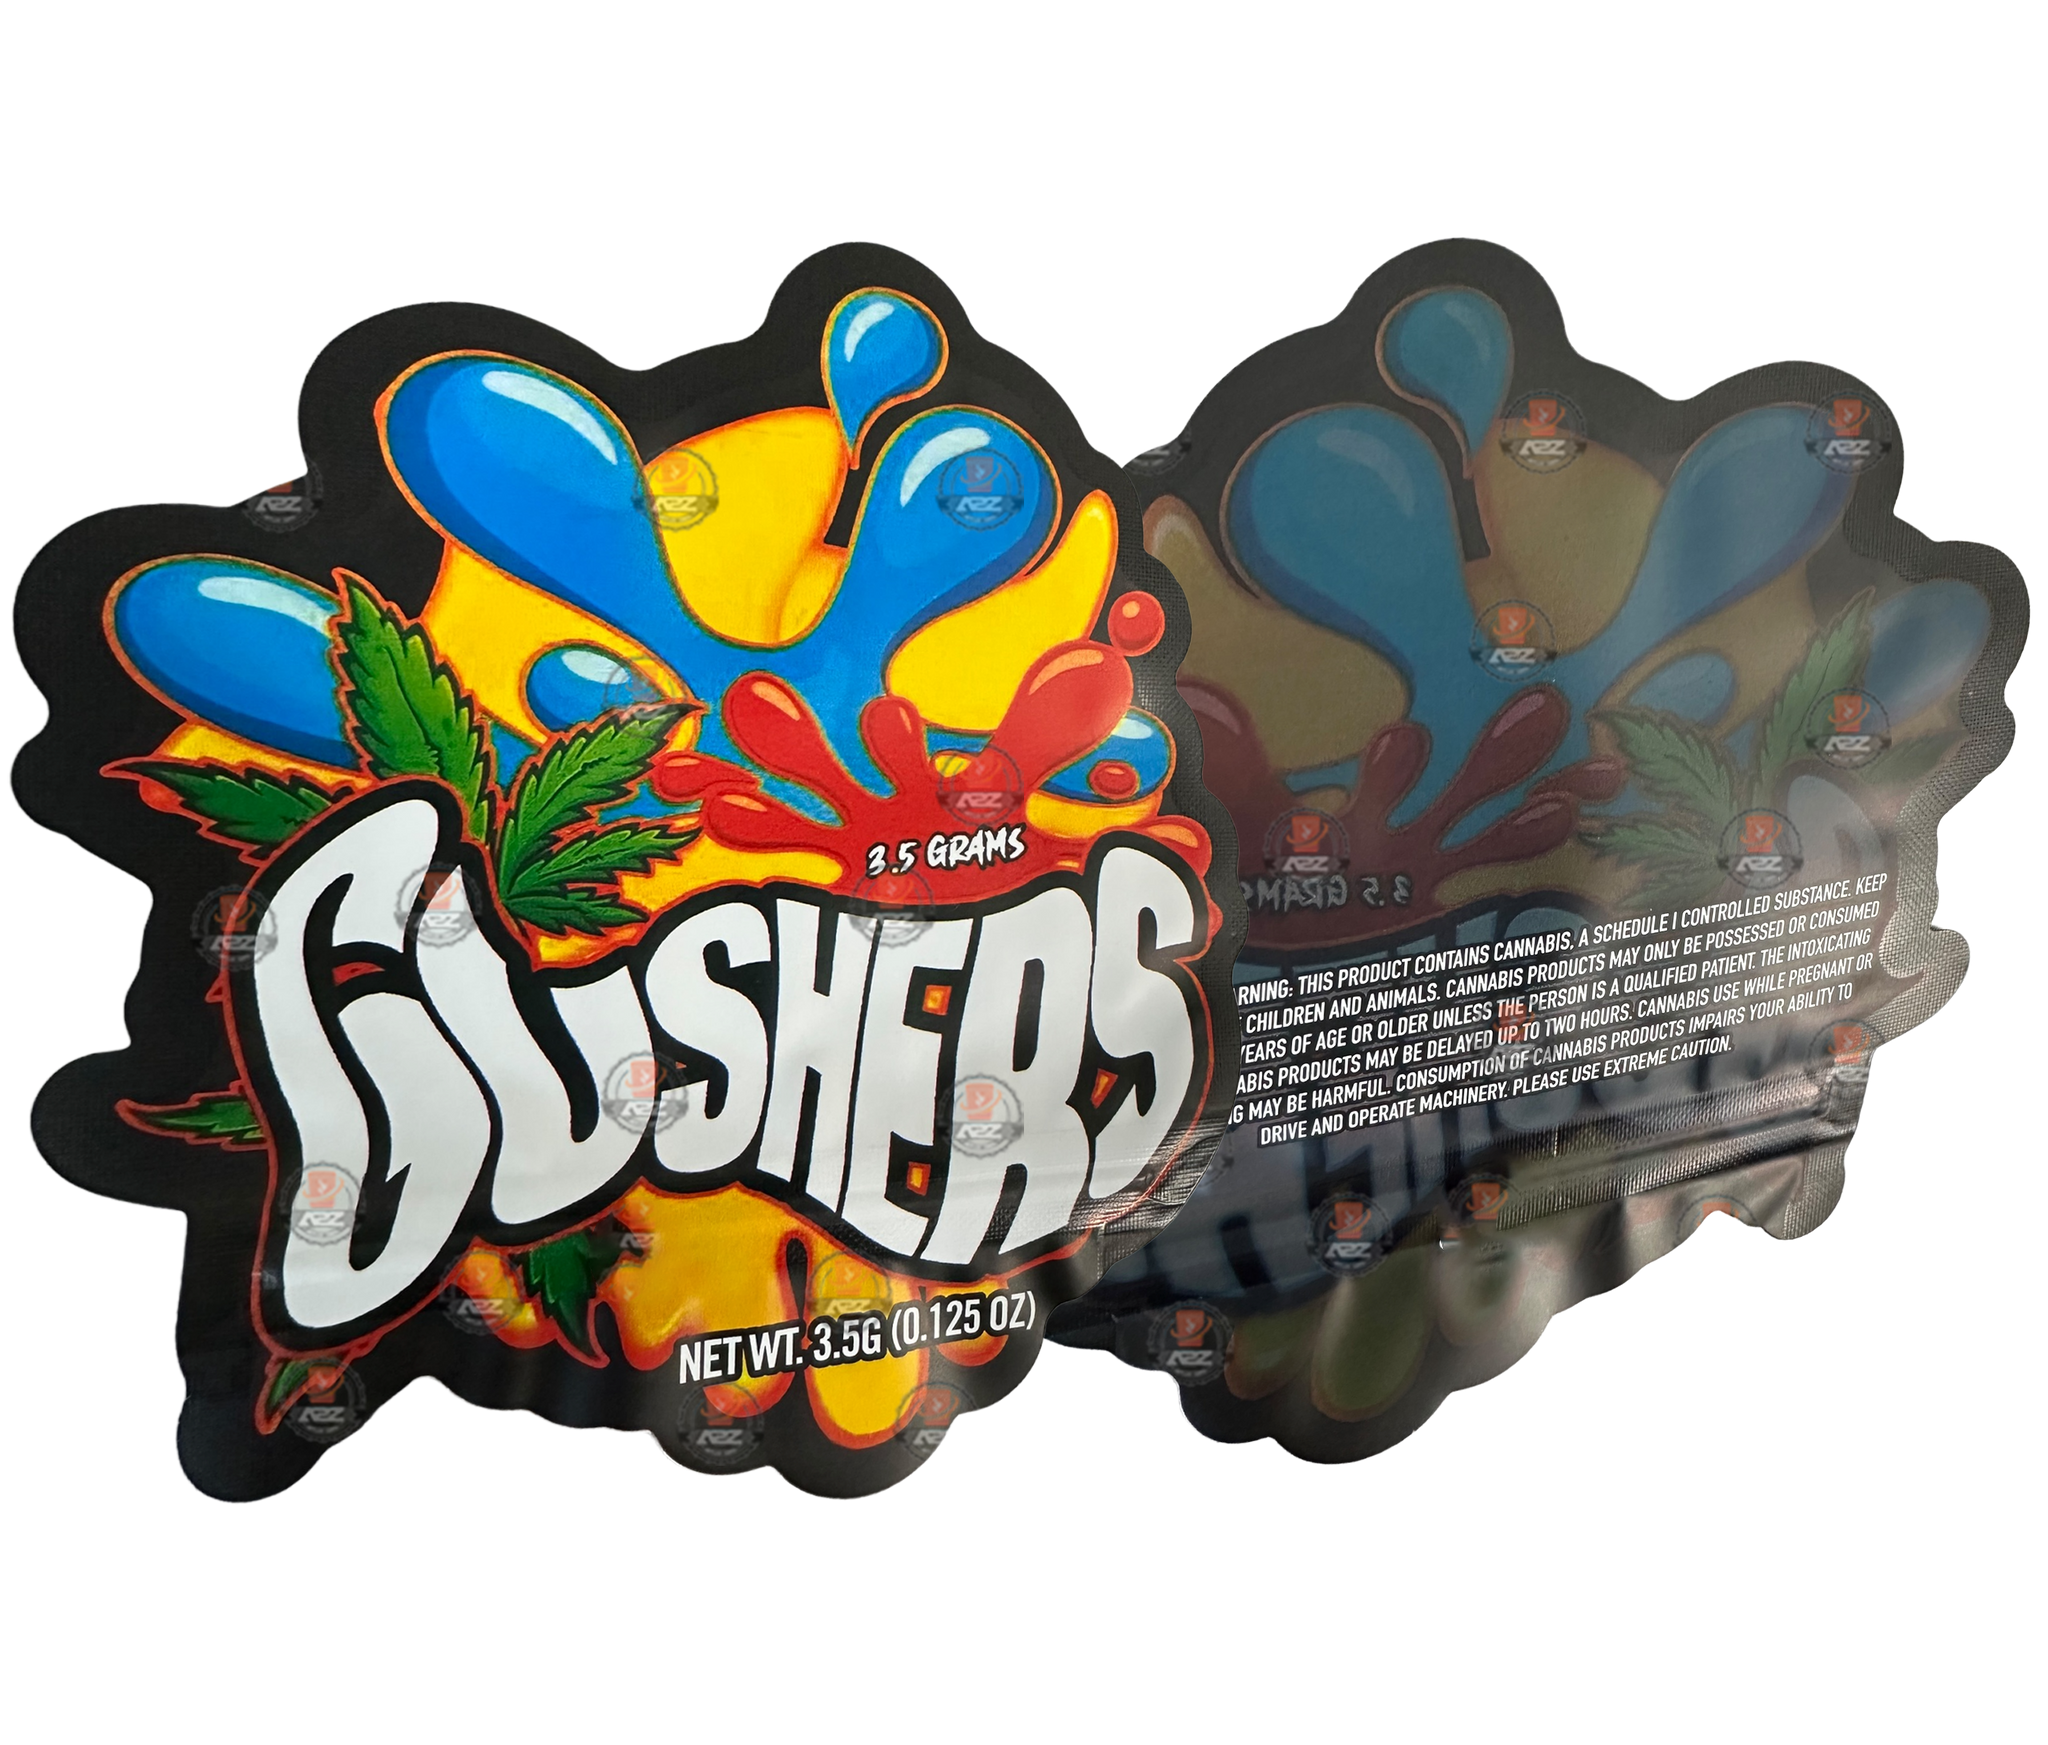 Gushers cut out Mylar Bags 3.5g Empty Packaging